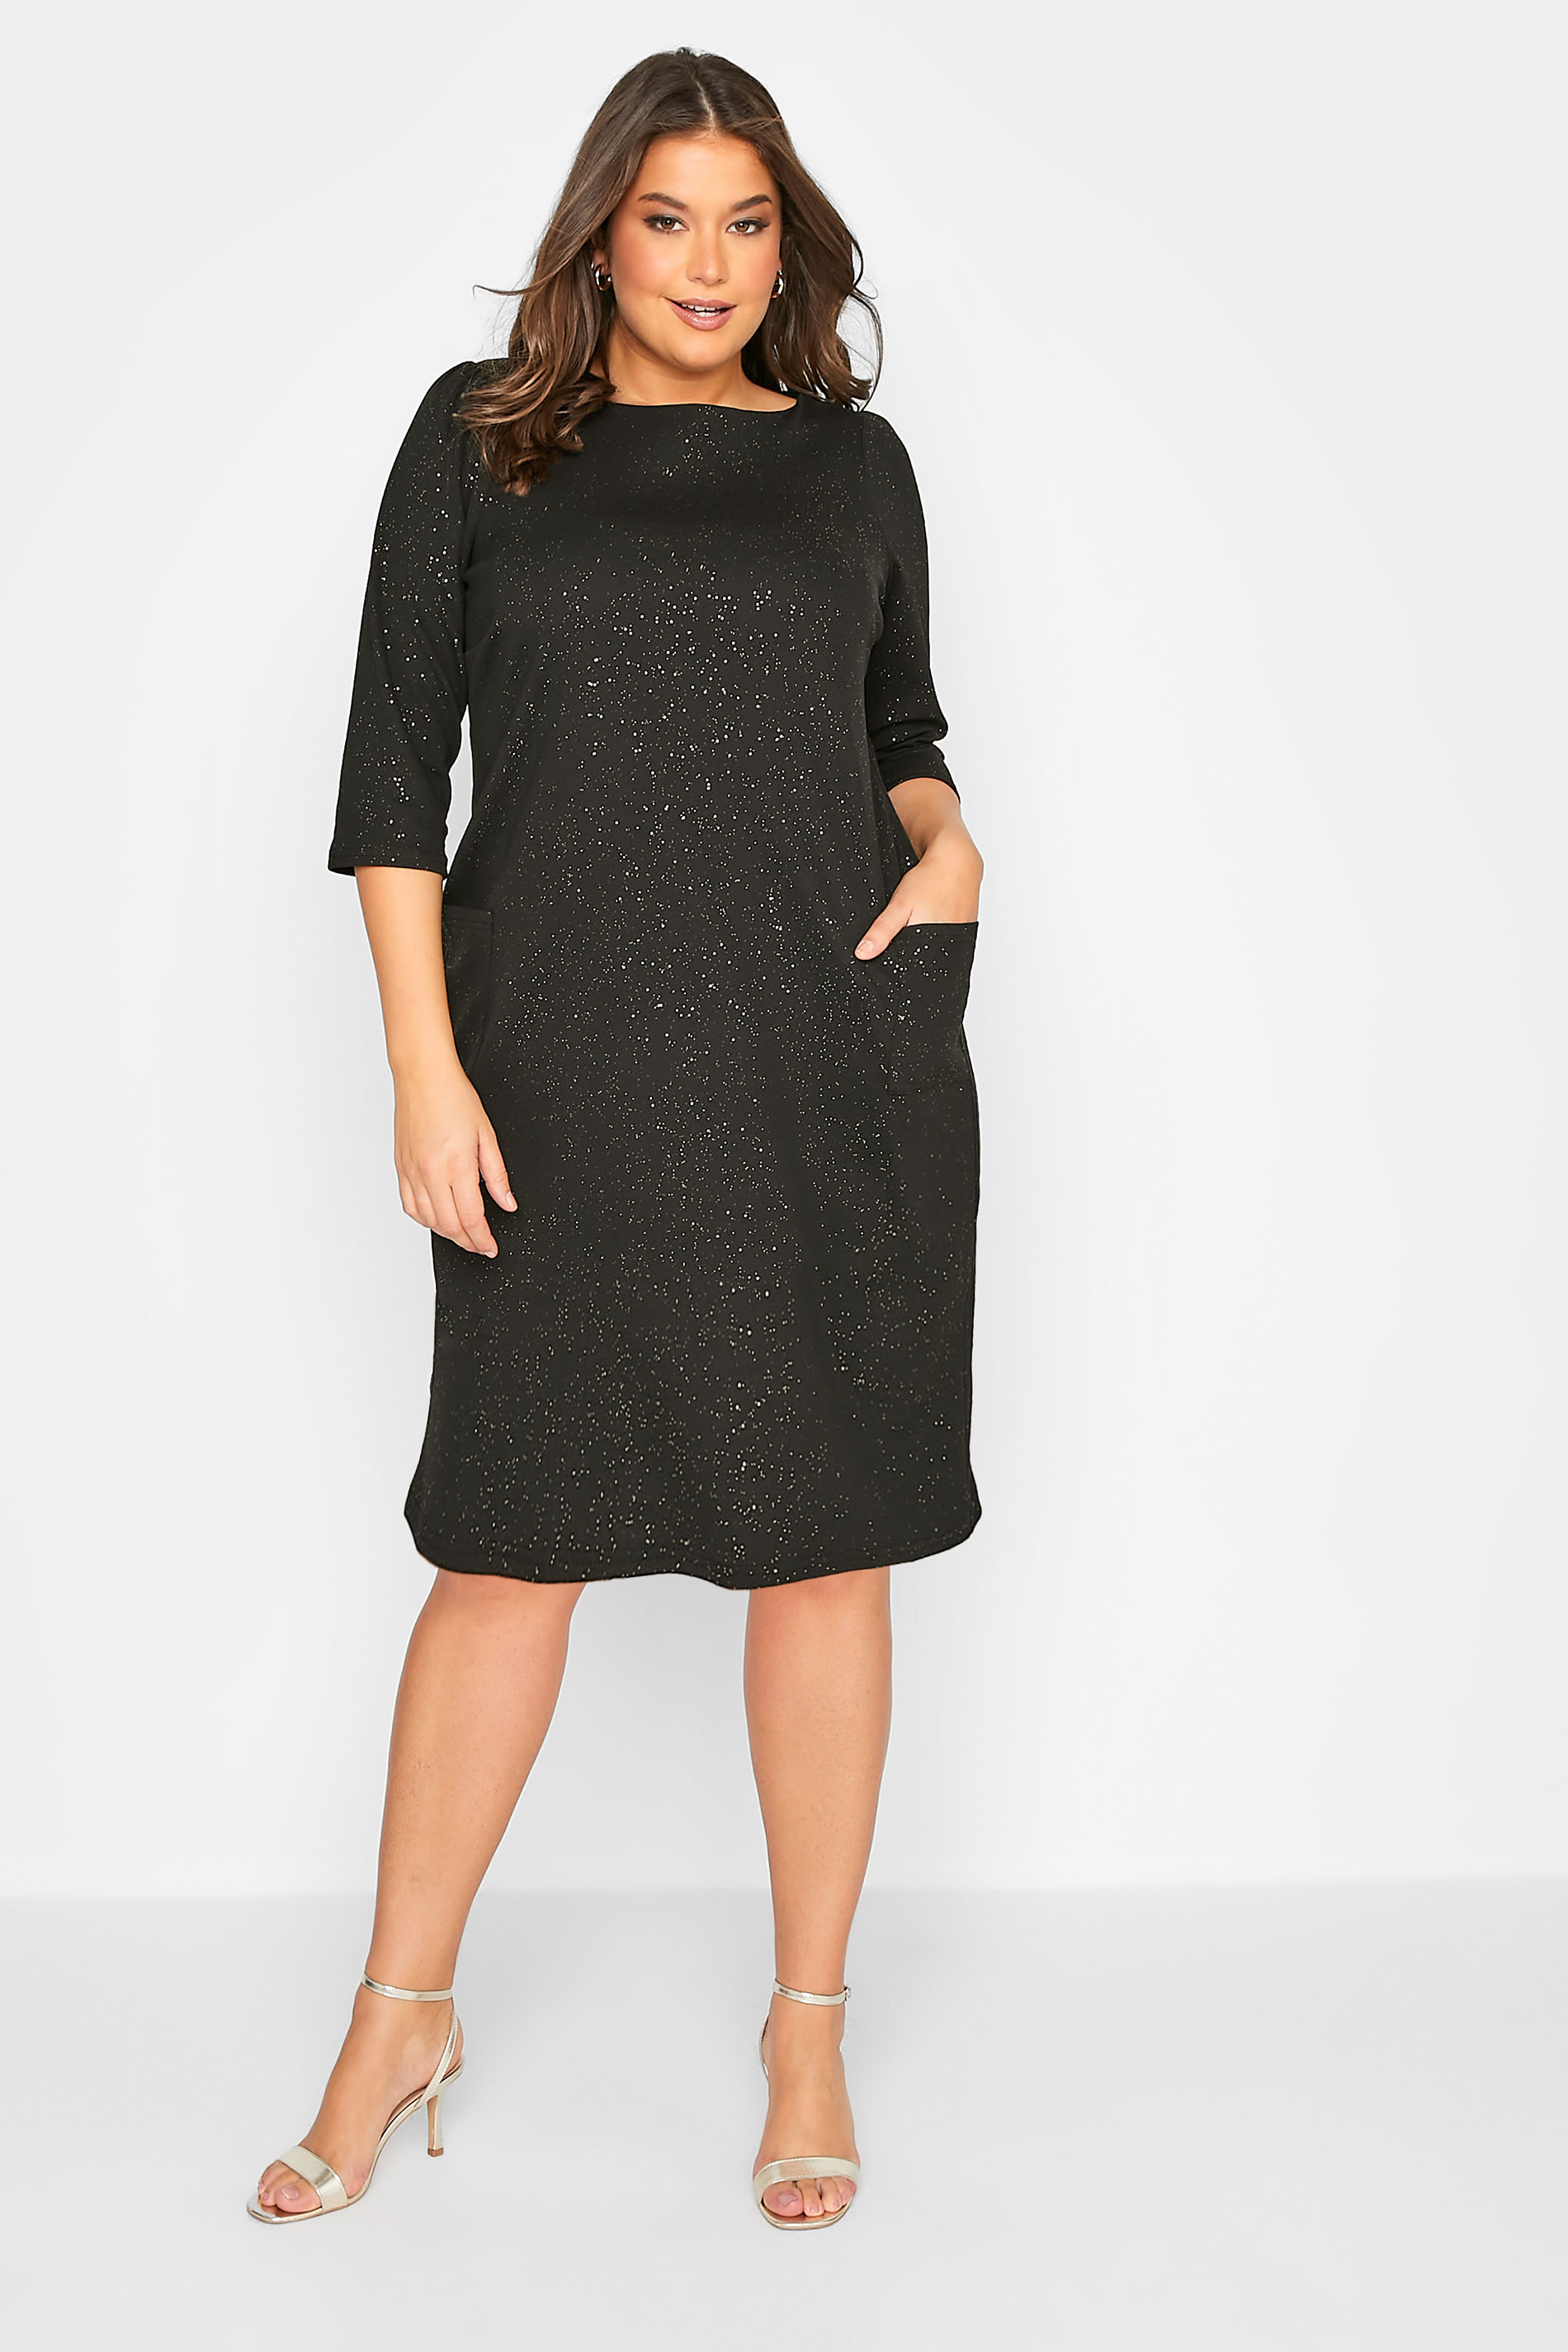 https://cdn.yoursclothing.com/Images/ProductImages/b677360d-add6-4c_174206_B.jpg